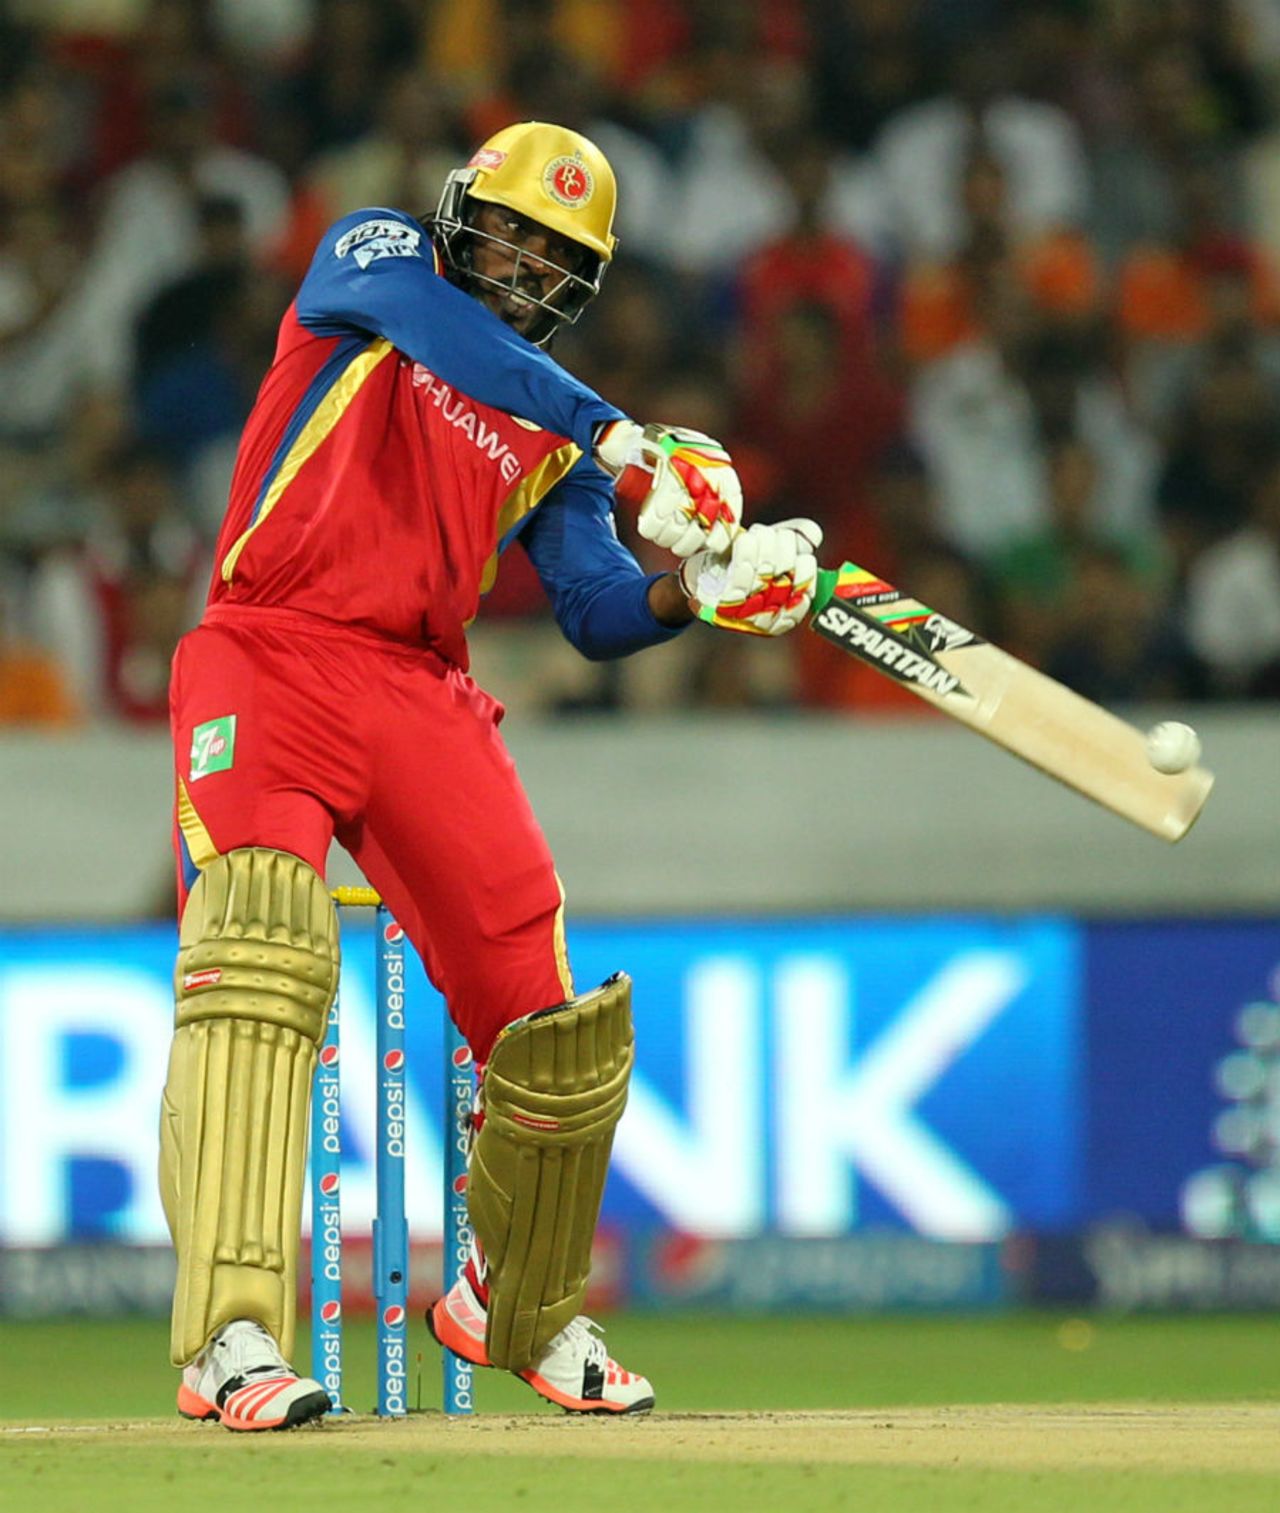 The long handle as demonstrated by Chris Gayle, Sunrisers Hyderabad v Royal Challengers Bangalore, IPL 2015, Hyderabad, May 15, 2015